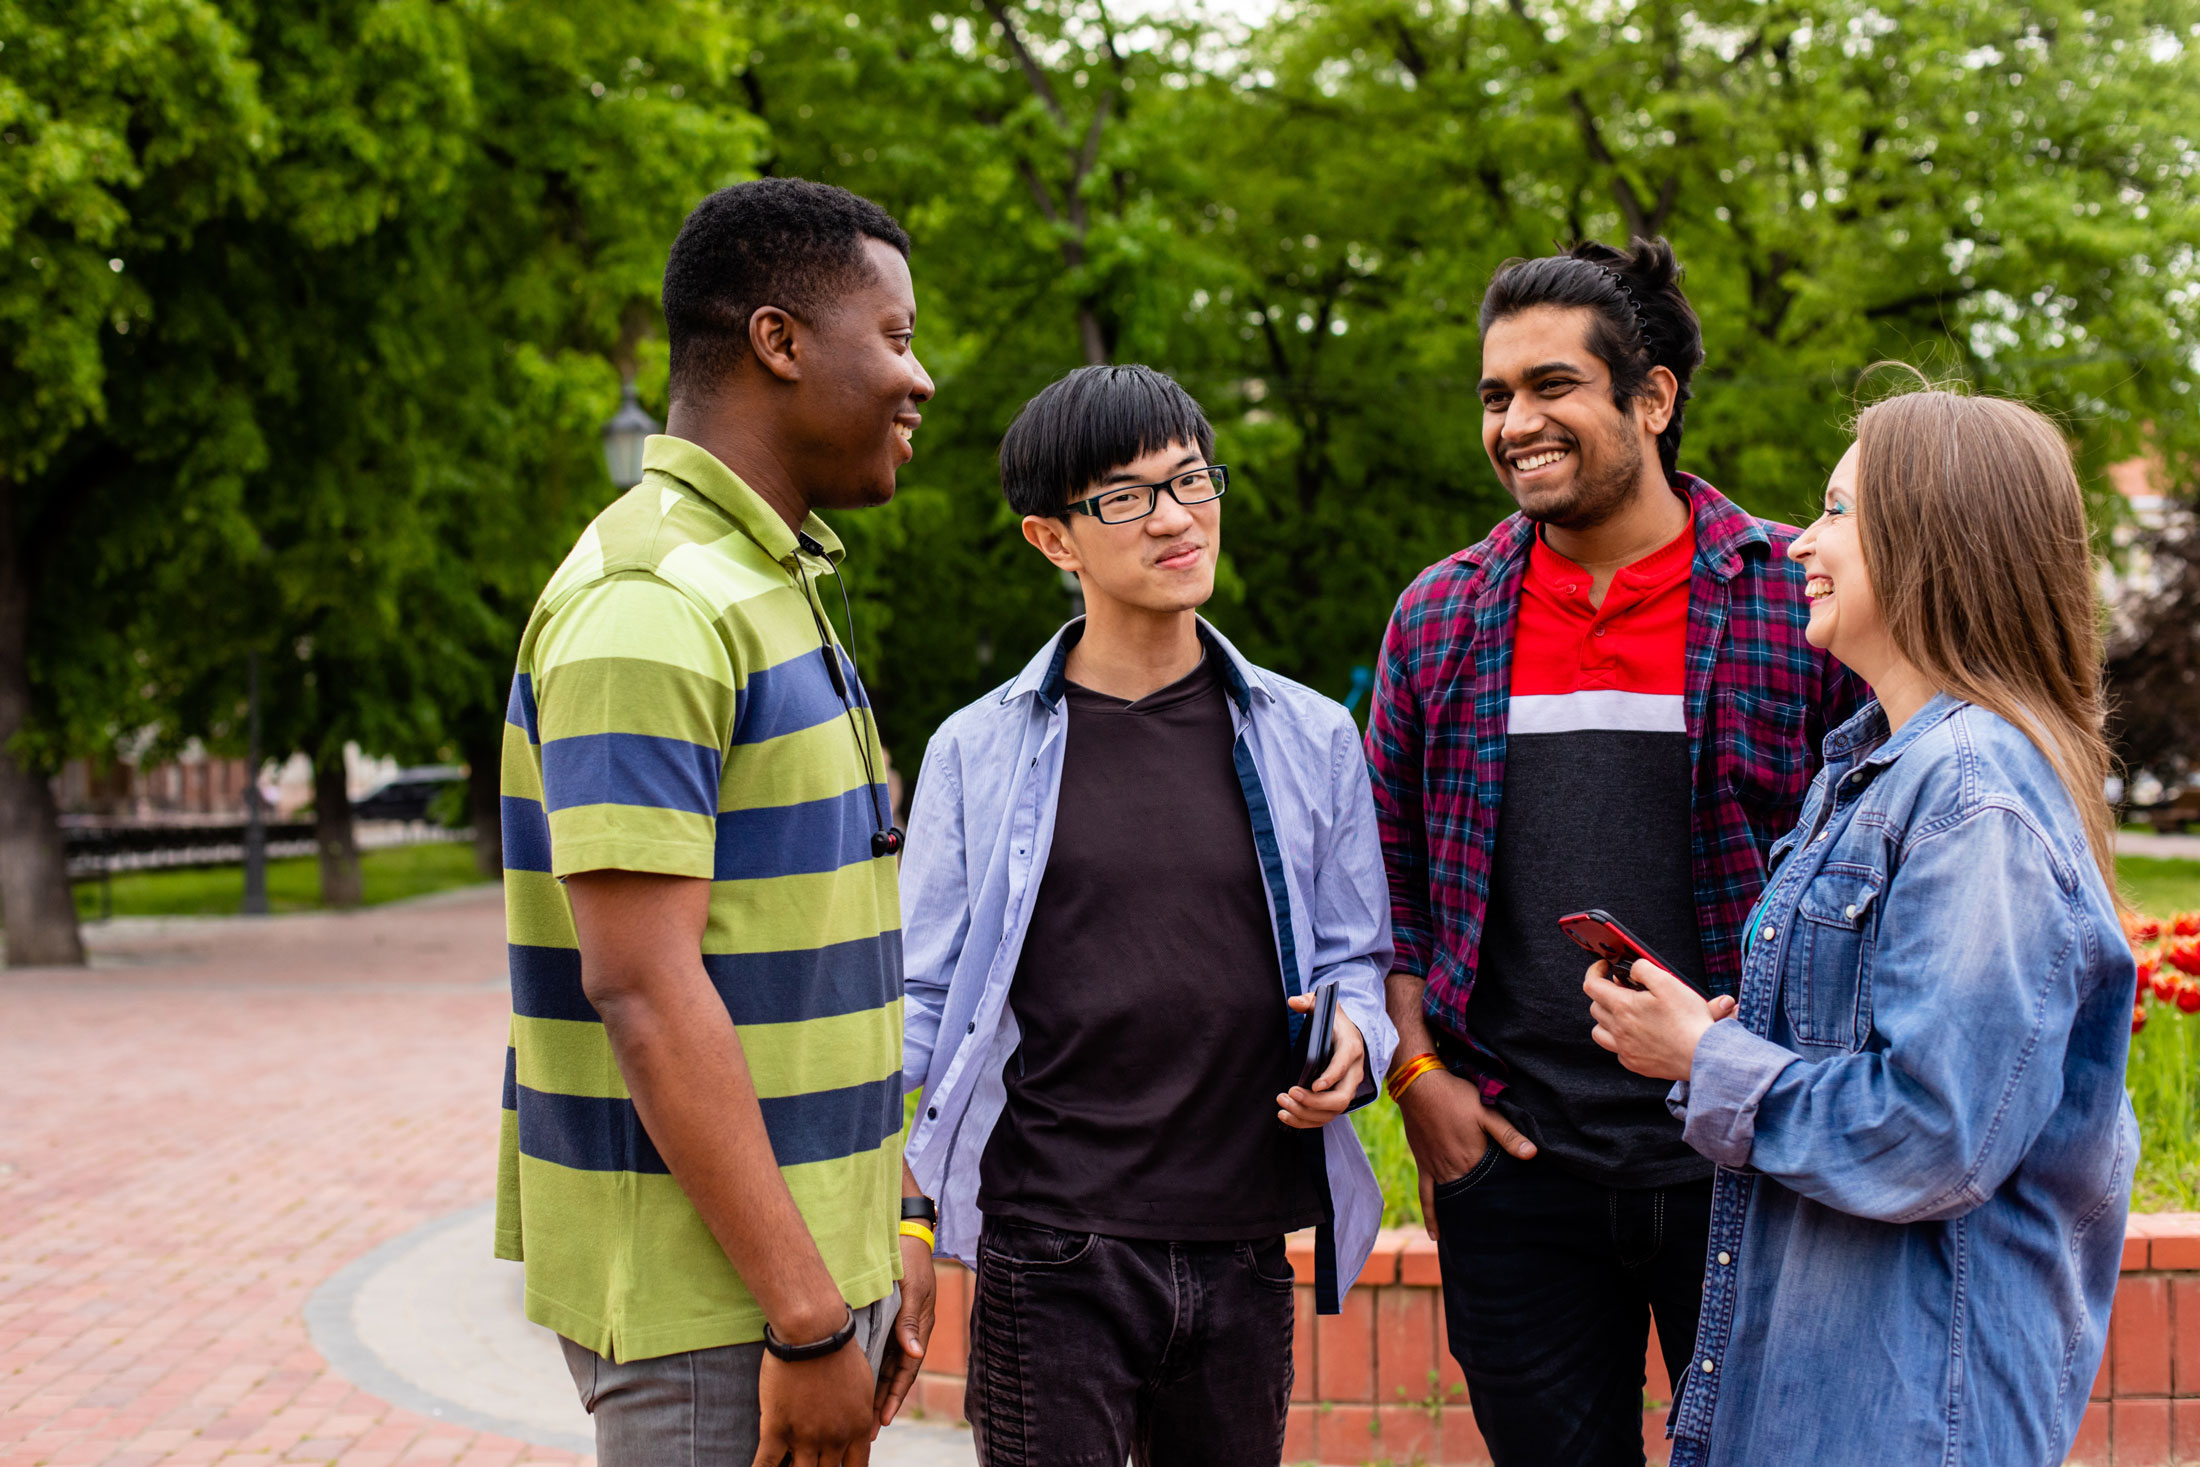 Four students of different ethnicities talking and having fun in a university campus.